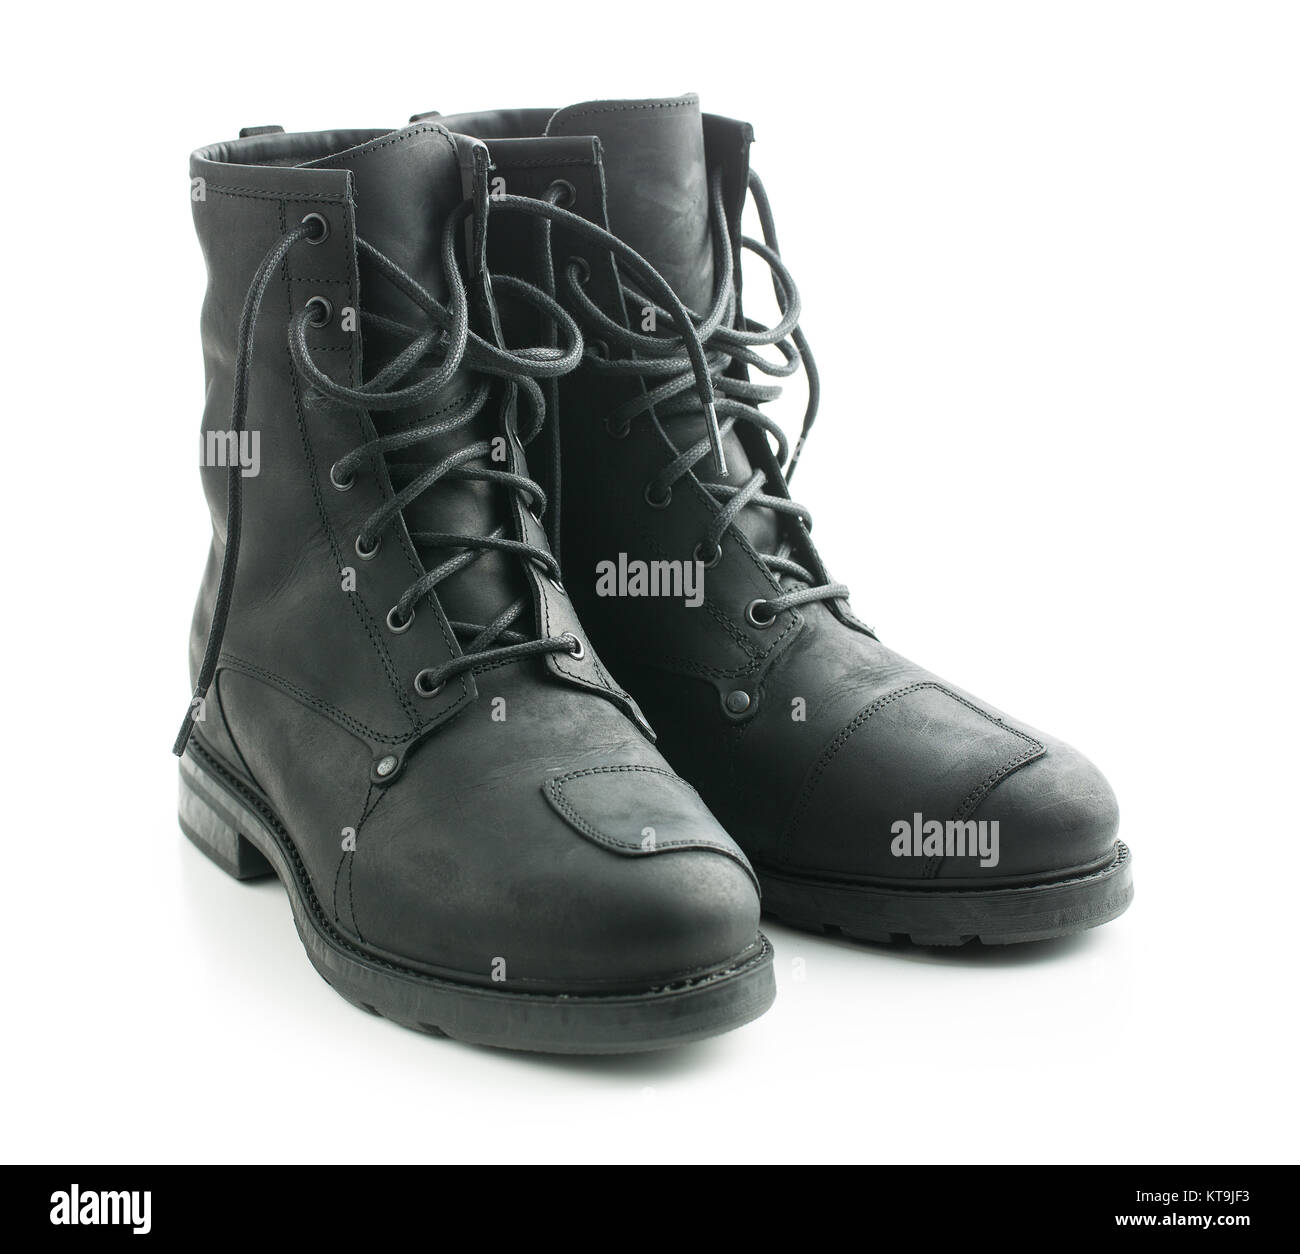 Black Riding Boots Stock Photos & Black Riding Boots Stock Images - Alamy